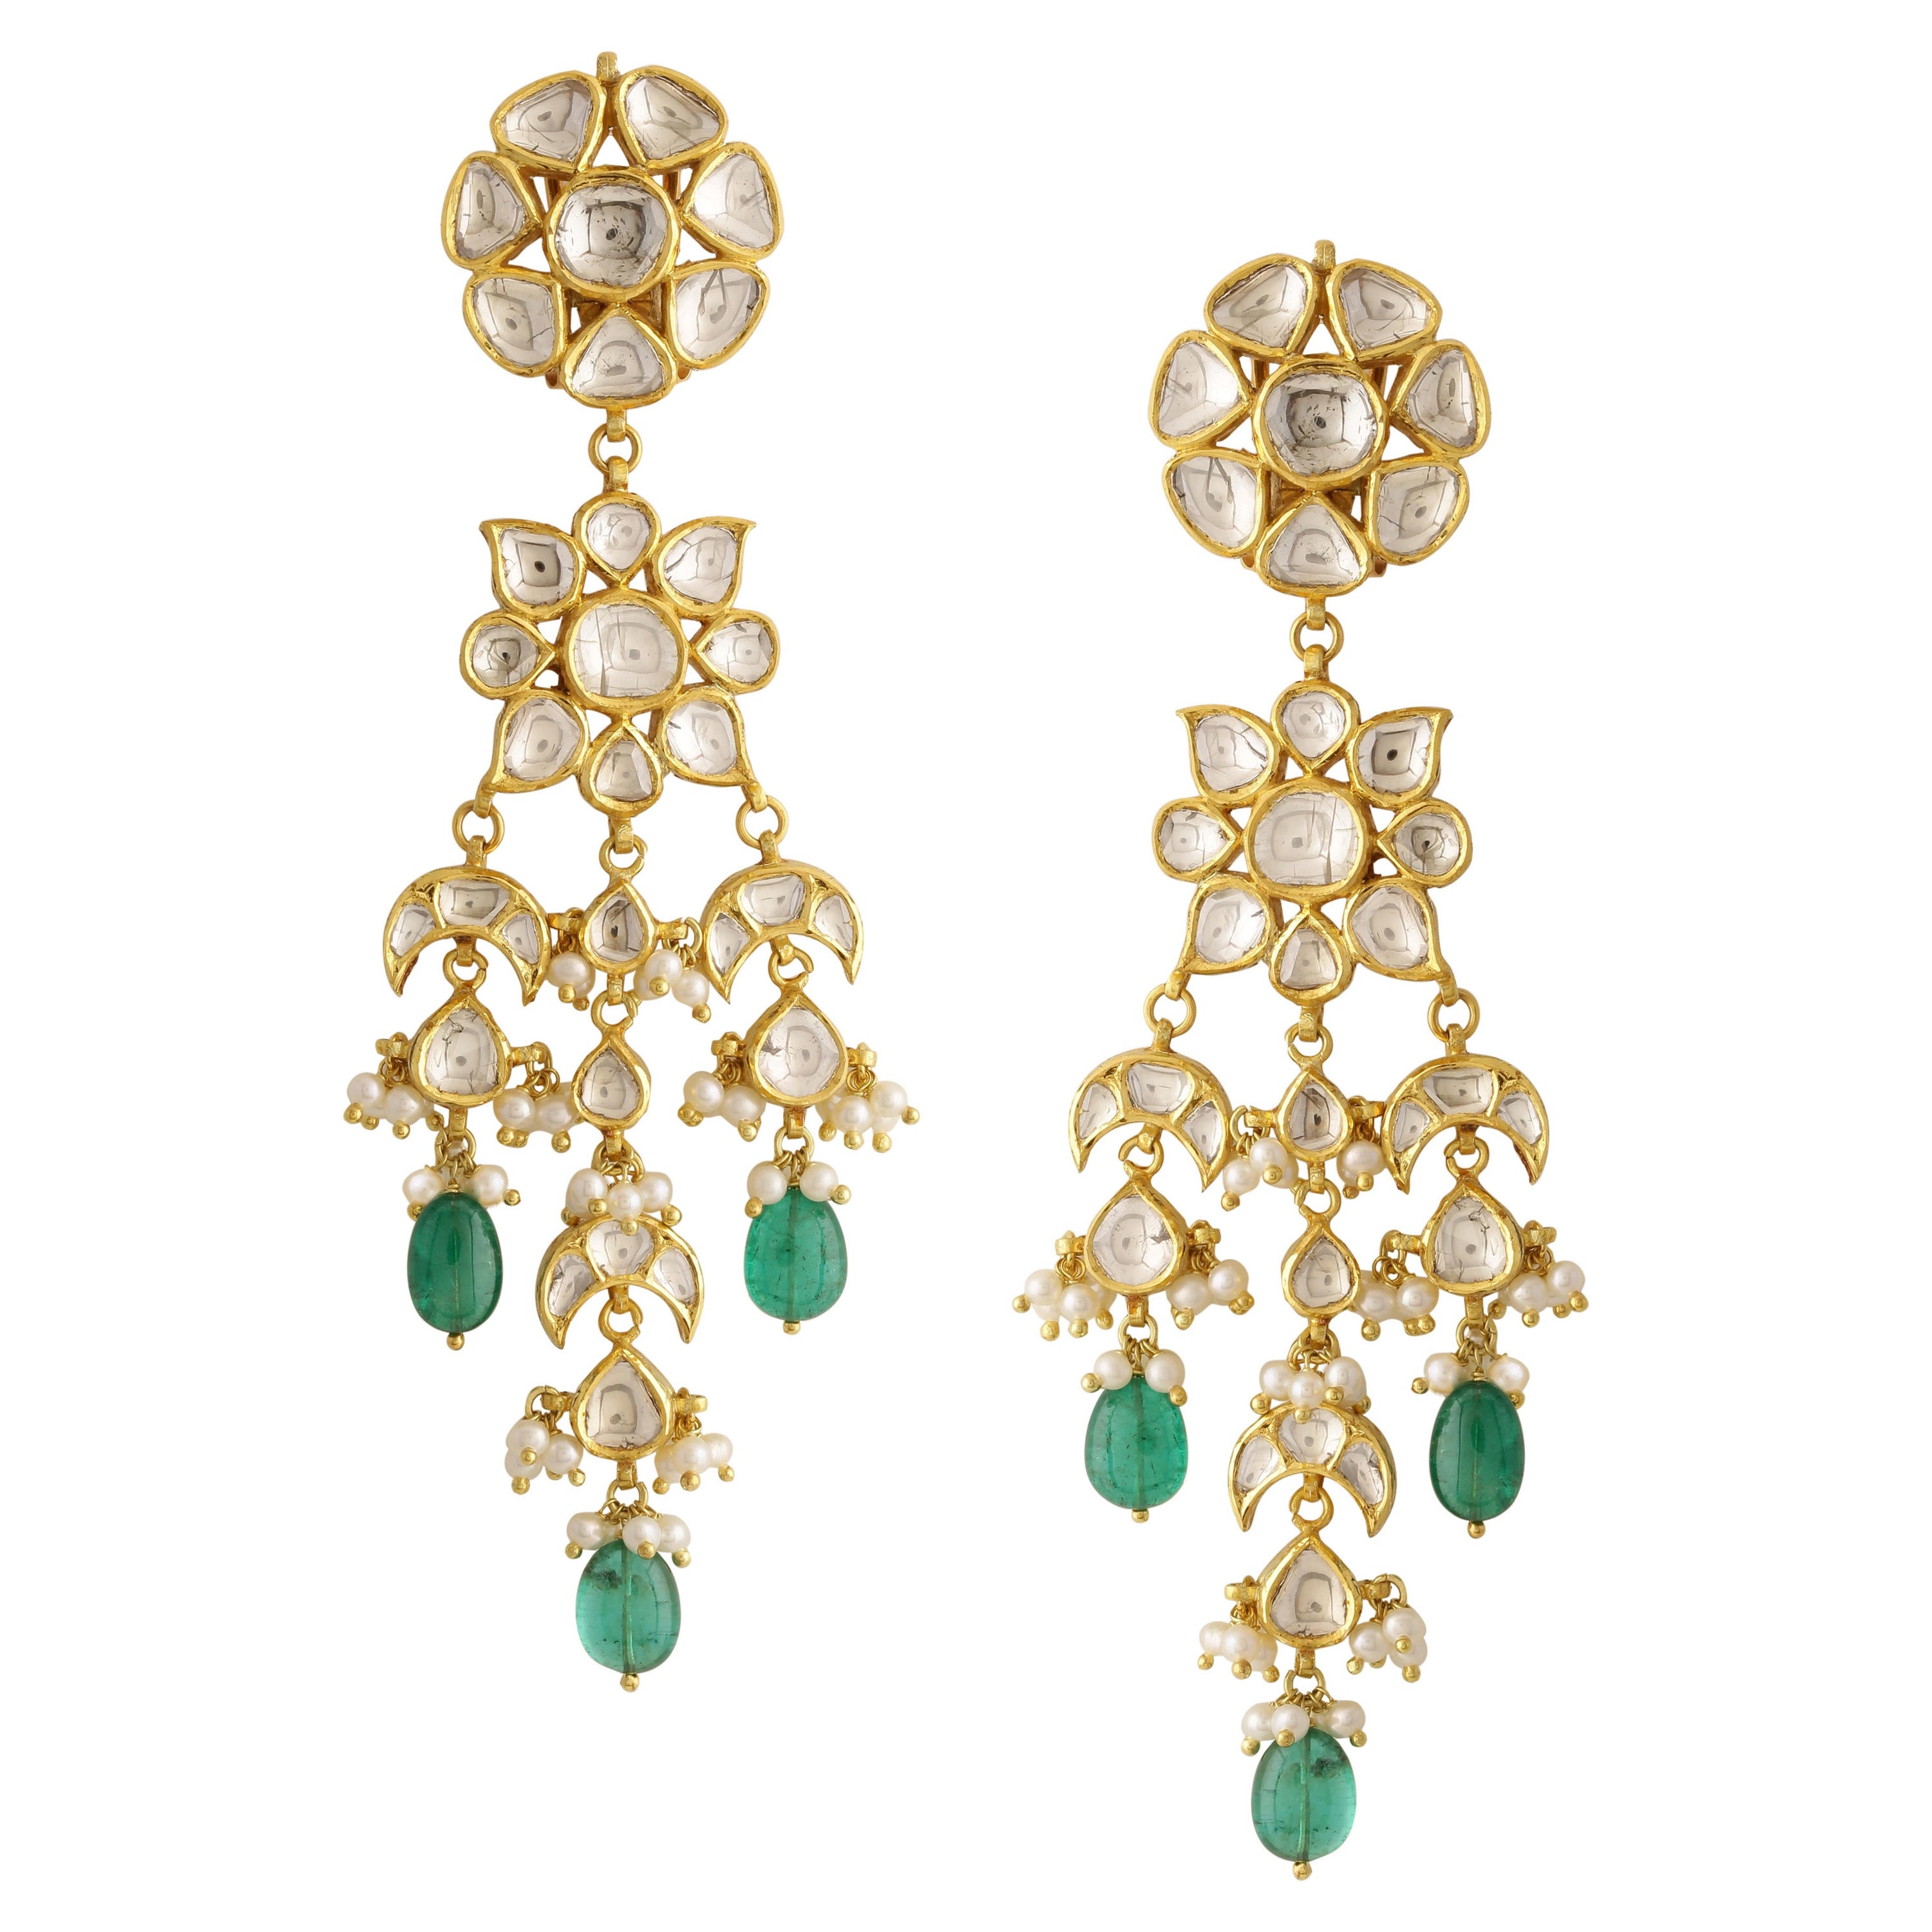 Chandelier Earrings with Diamond and Intricate Enamel Handcrafted in ...